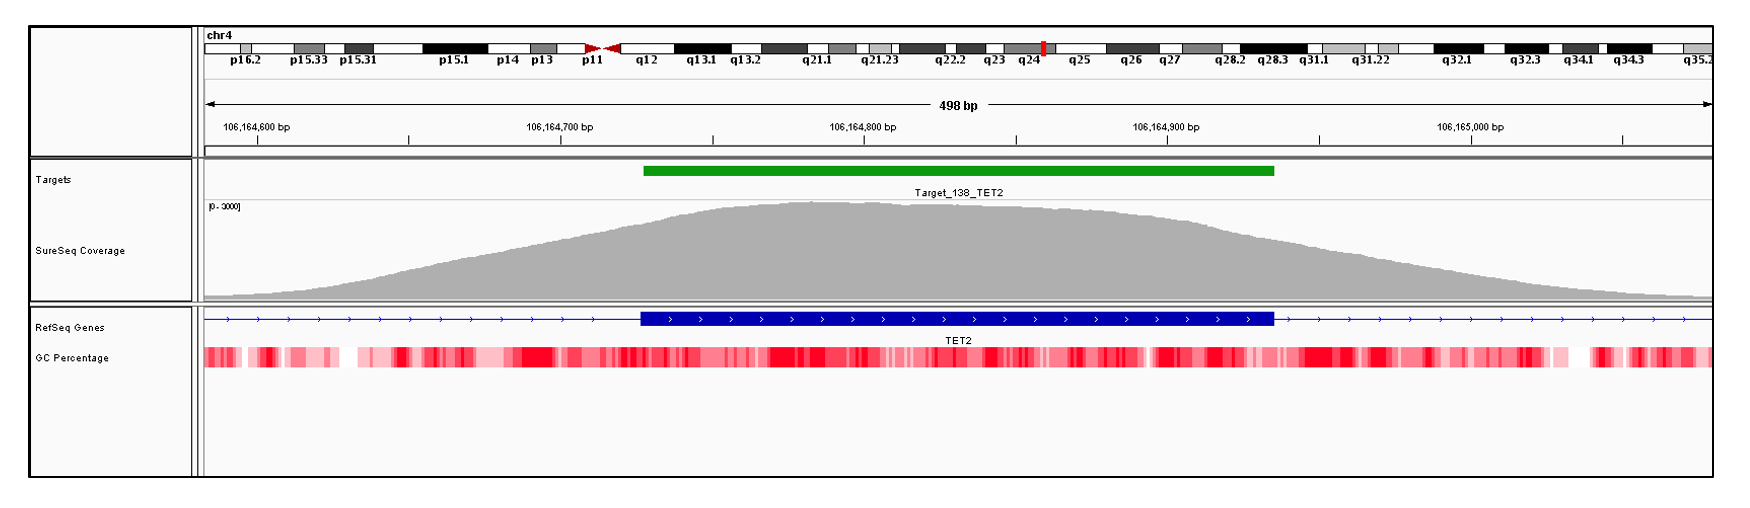 TET2 Exon 6 (hg19 chr4:106164727-106164935). Depth of coverage per base (grey). Targeted region (green). Gene coding region as defined by RefSeq (blue). GC percentage (red). Image